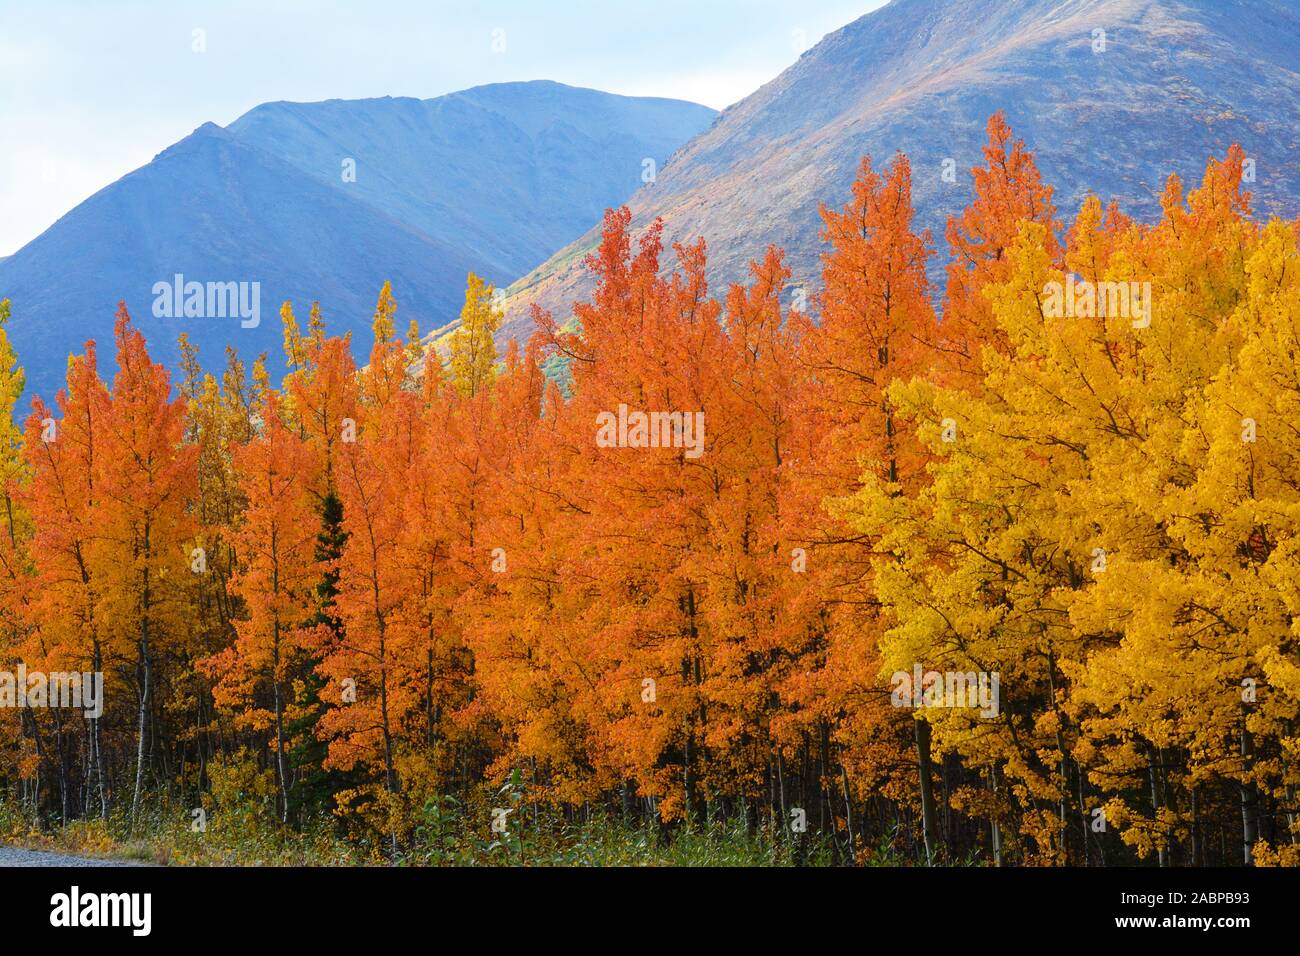 Alaskan forest in fall colors Stock Photo